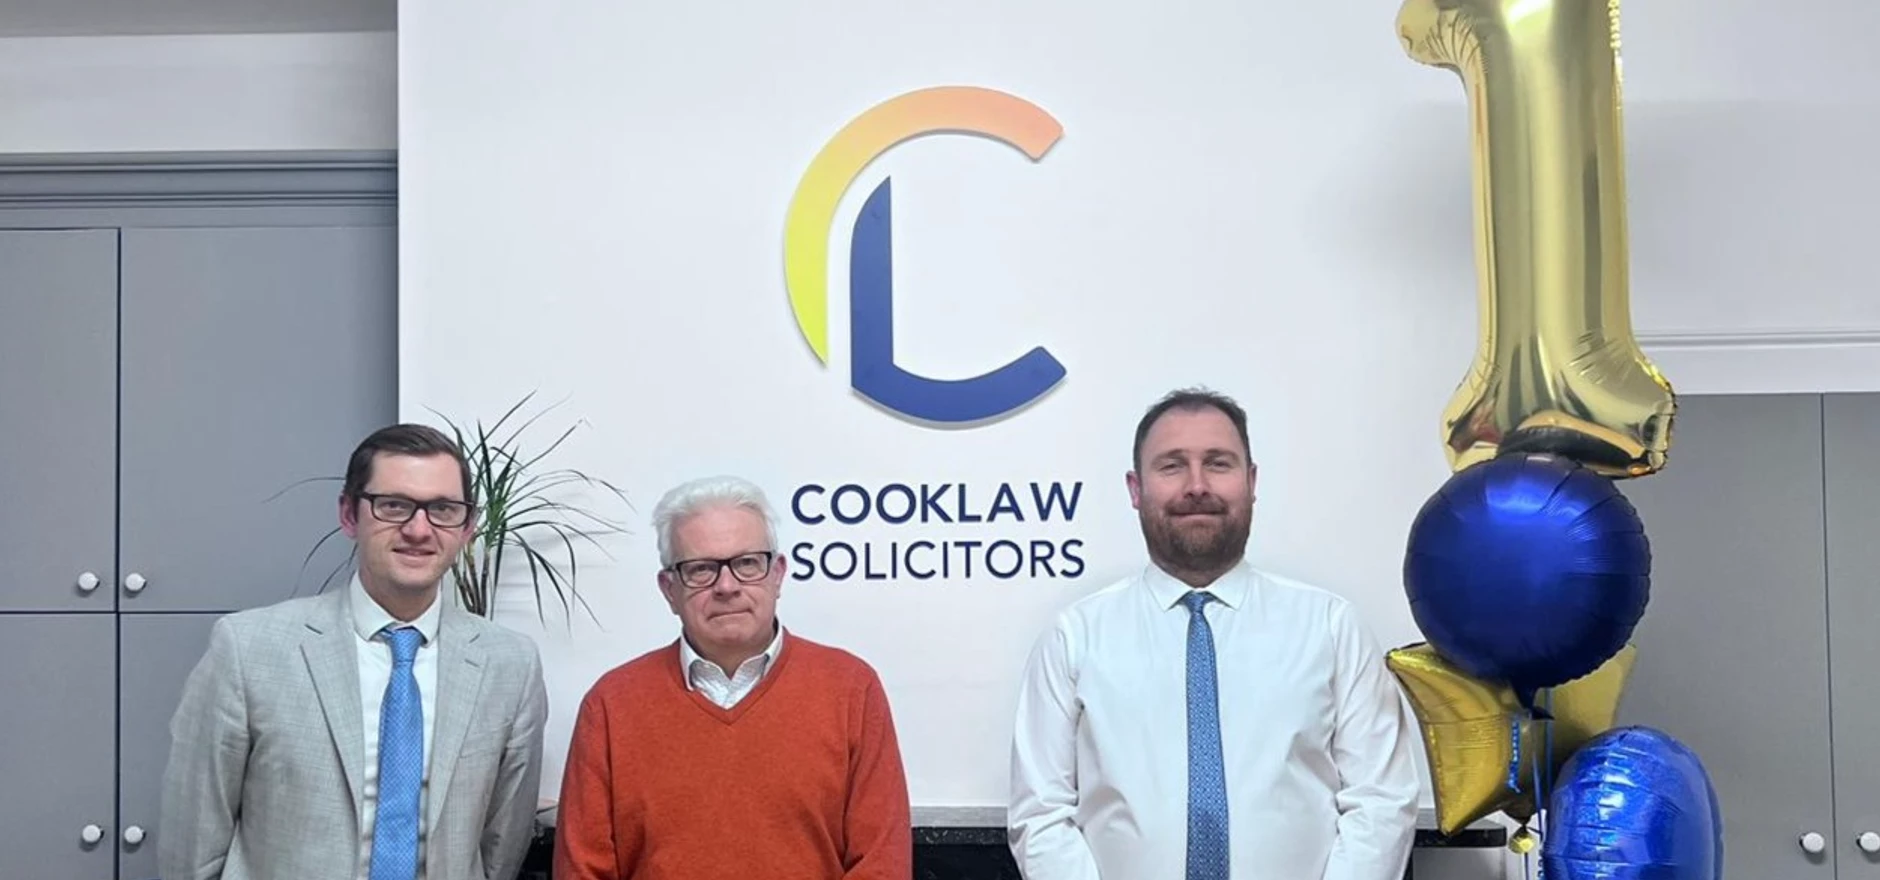 Cooklaw Solicitors.jpeg